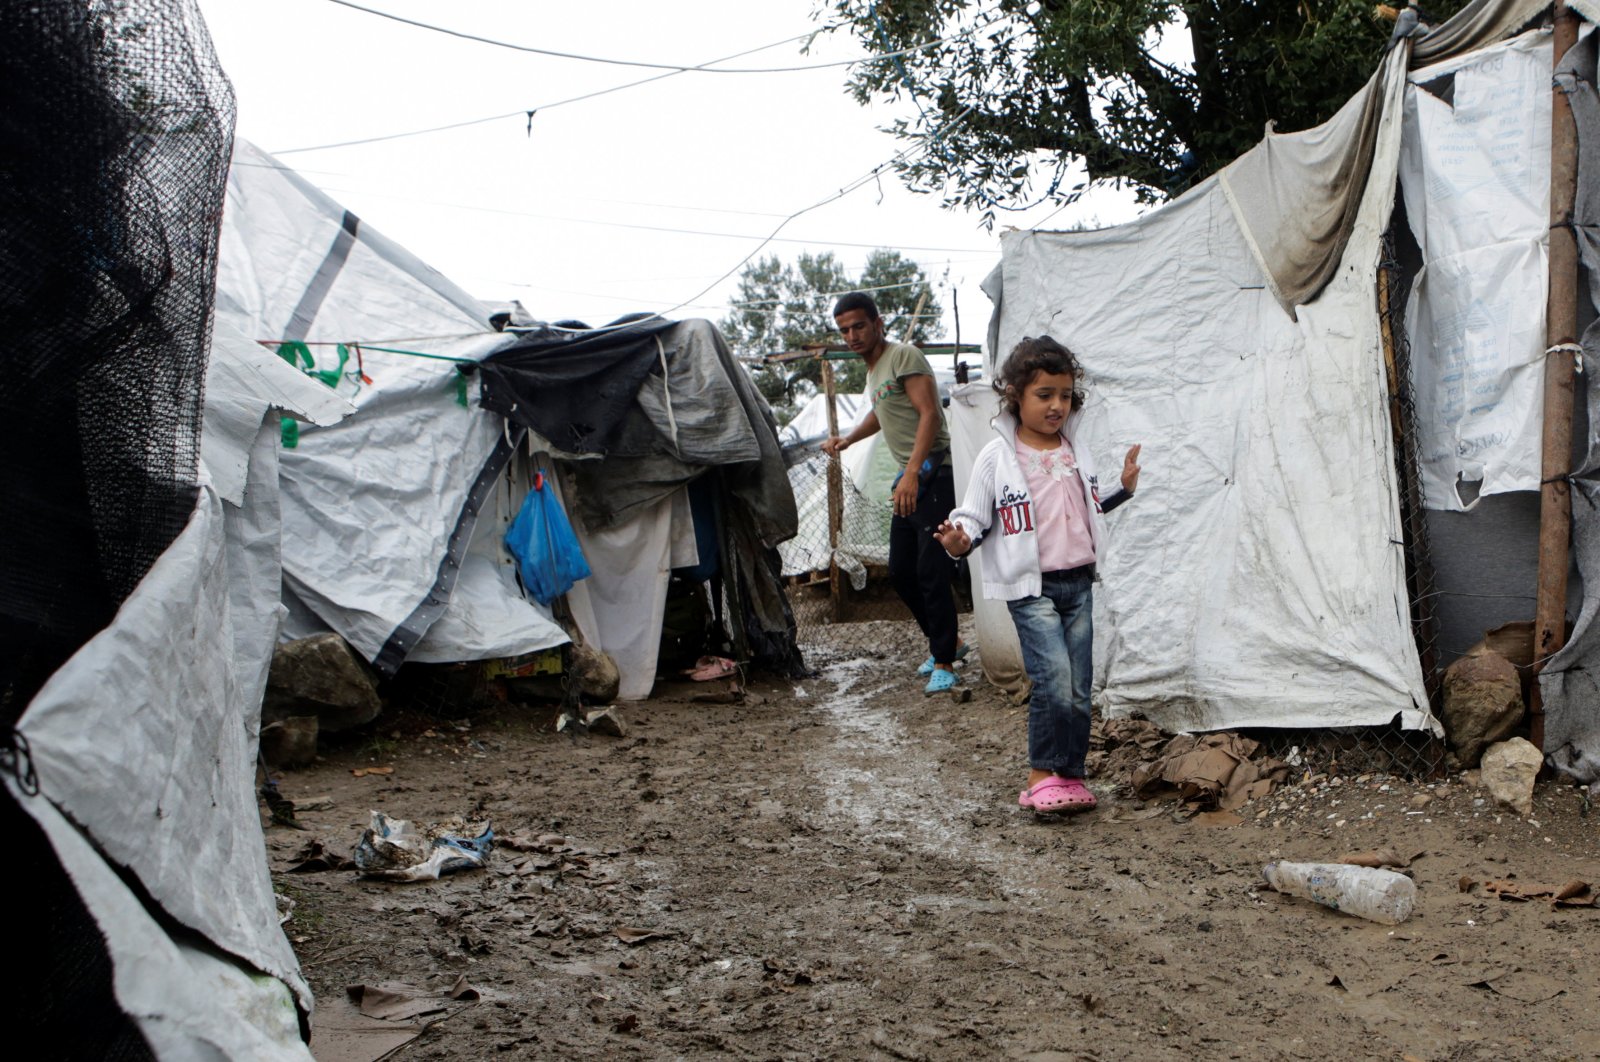 A girl makes her way next to tents at a makeshift camp for refugees and migrants next to the Moria camp, following a rainfall on the island of Lesbos, Greece, October 8, 2019. (REUTERS Photo)